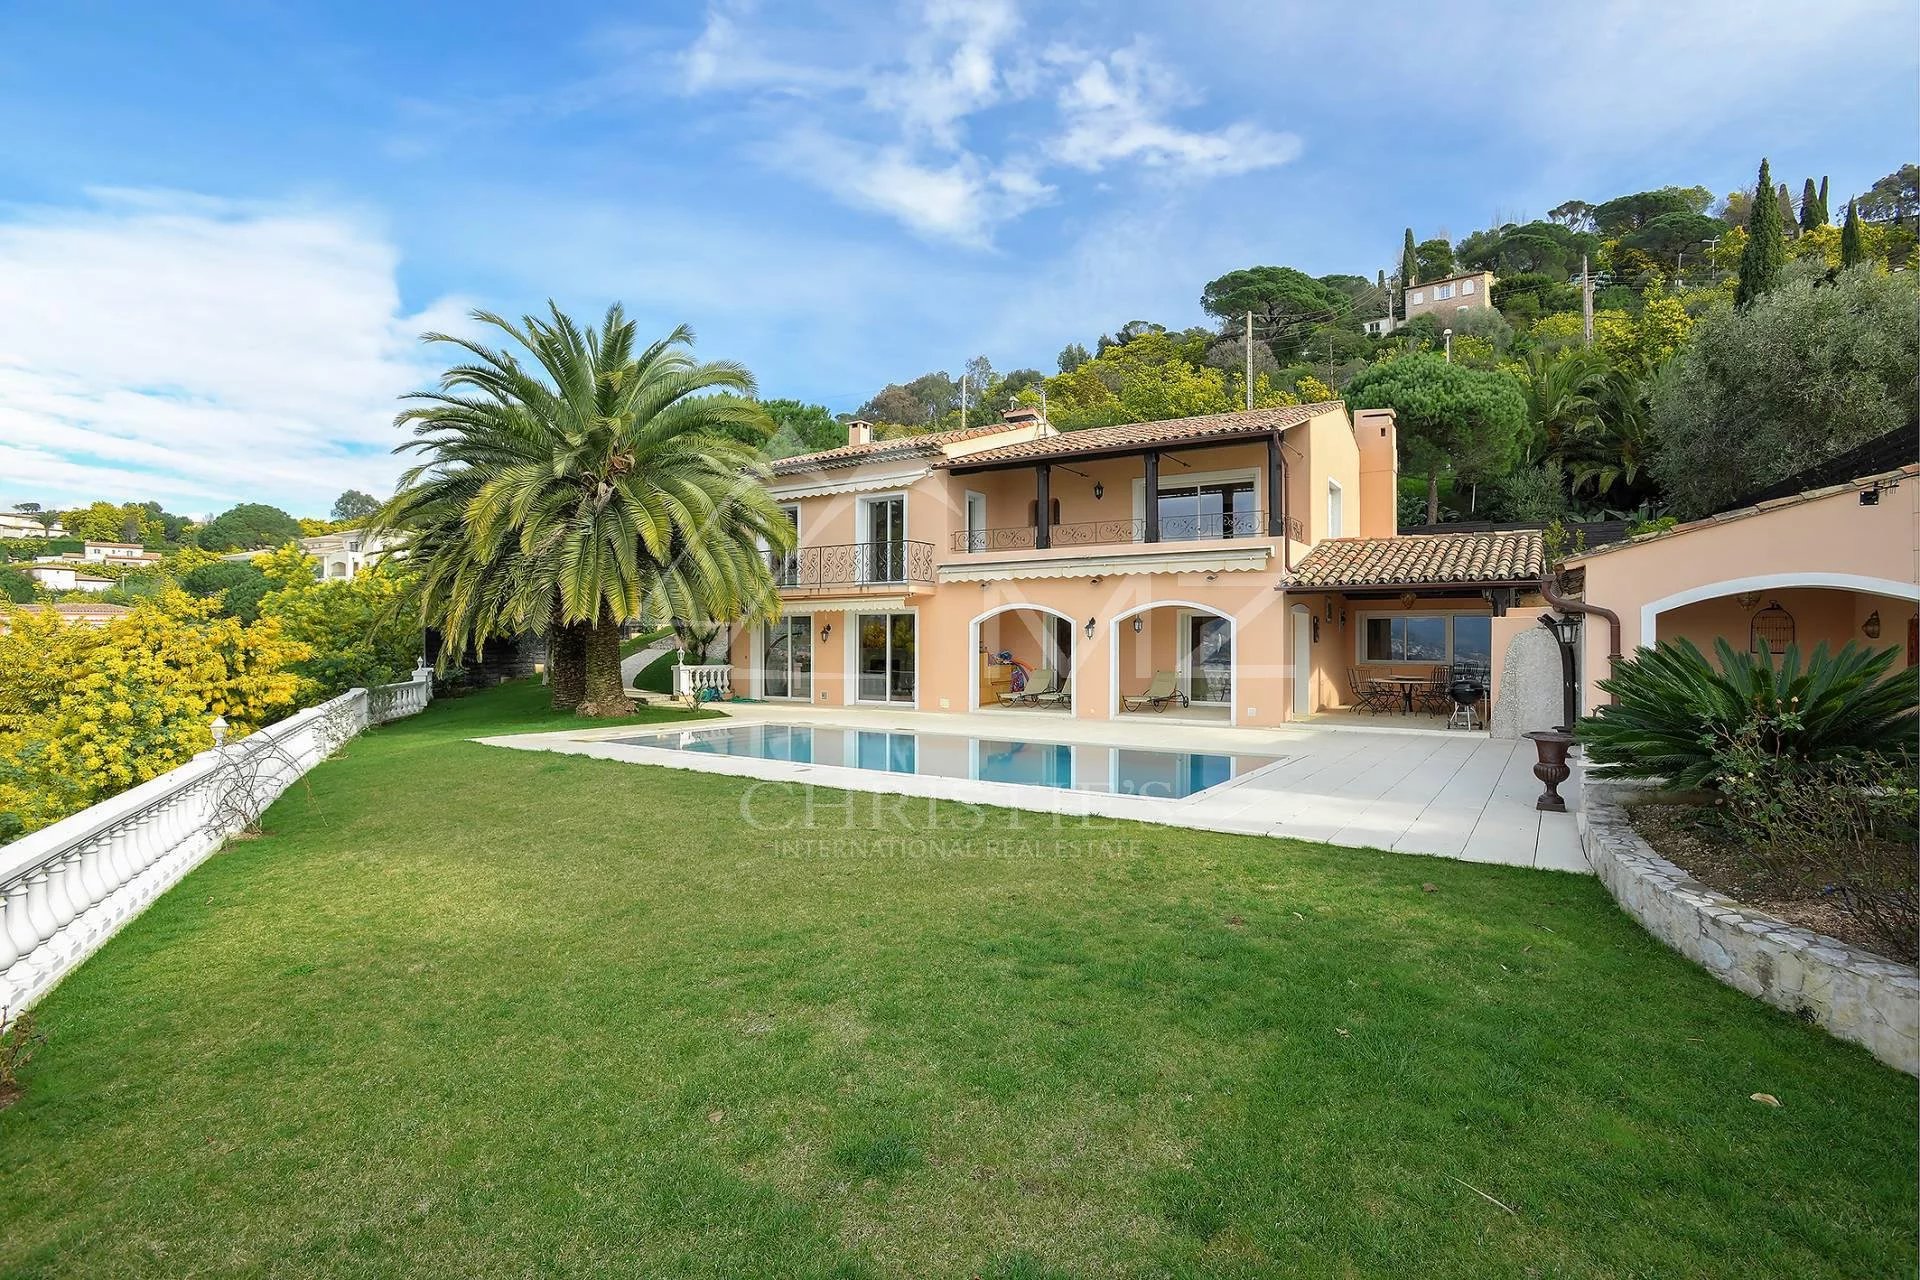 Cannes - Villa in a quiet area with sea view